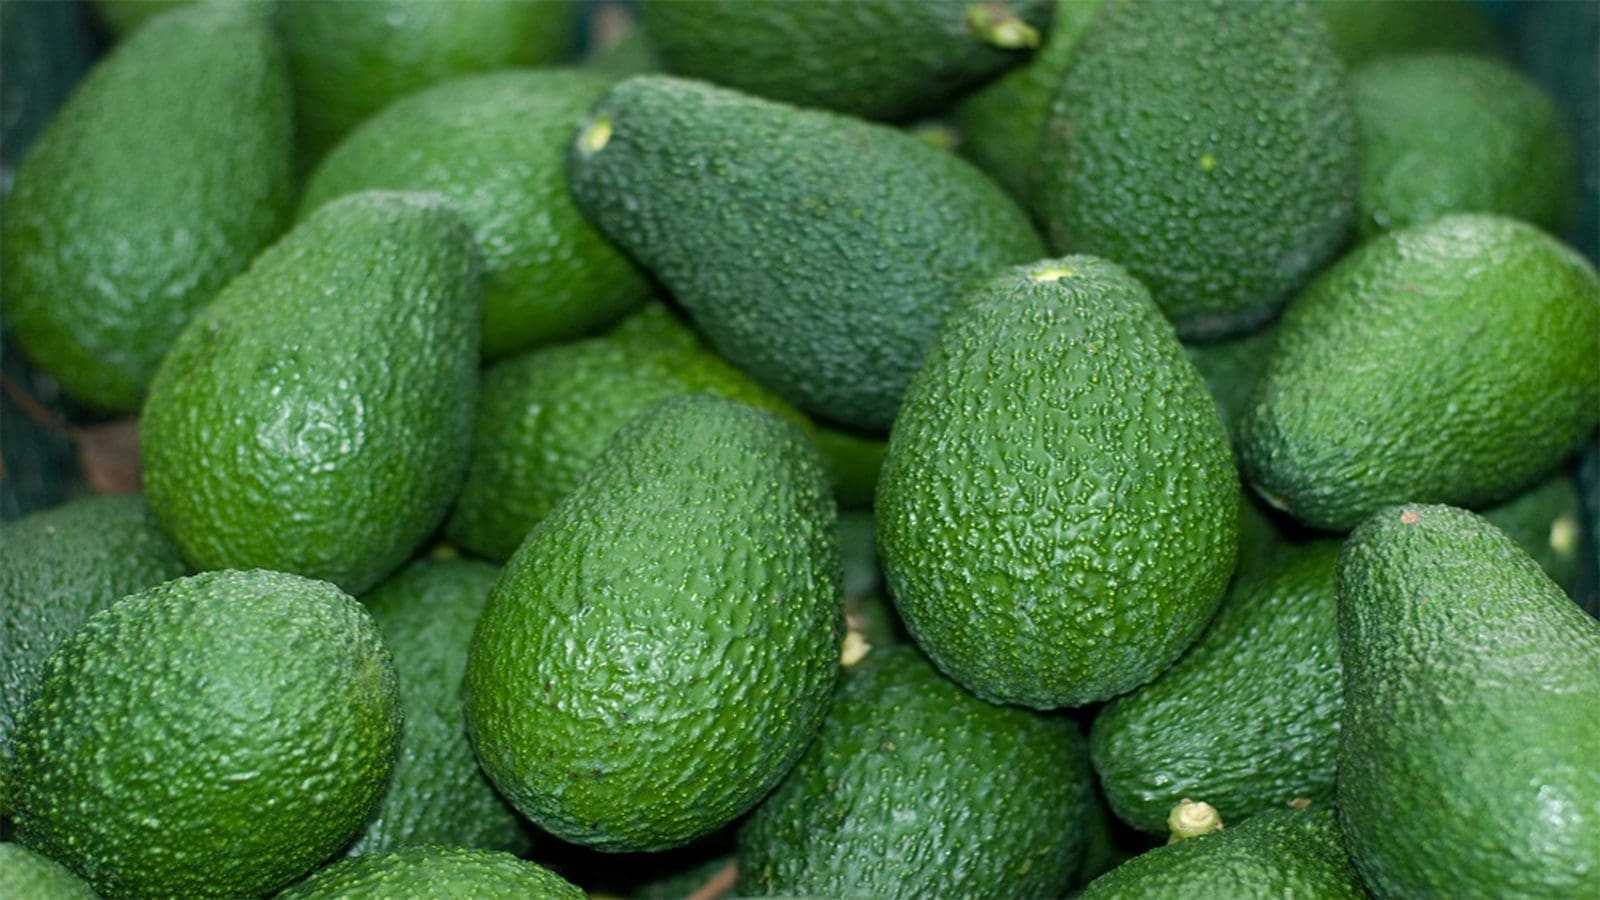 China grants Kenyan avocado exporters access to domestic market dotted with strict requirements